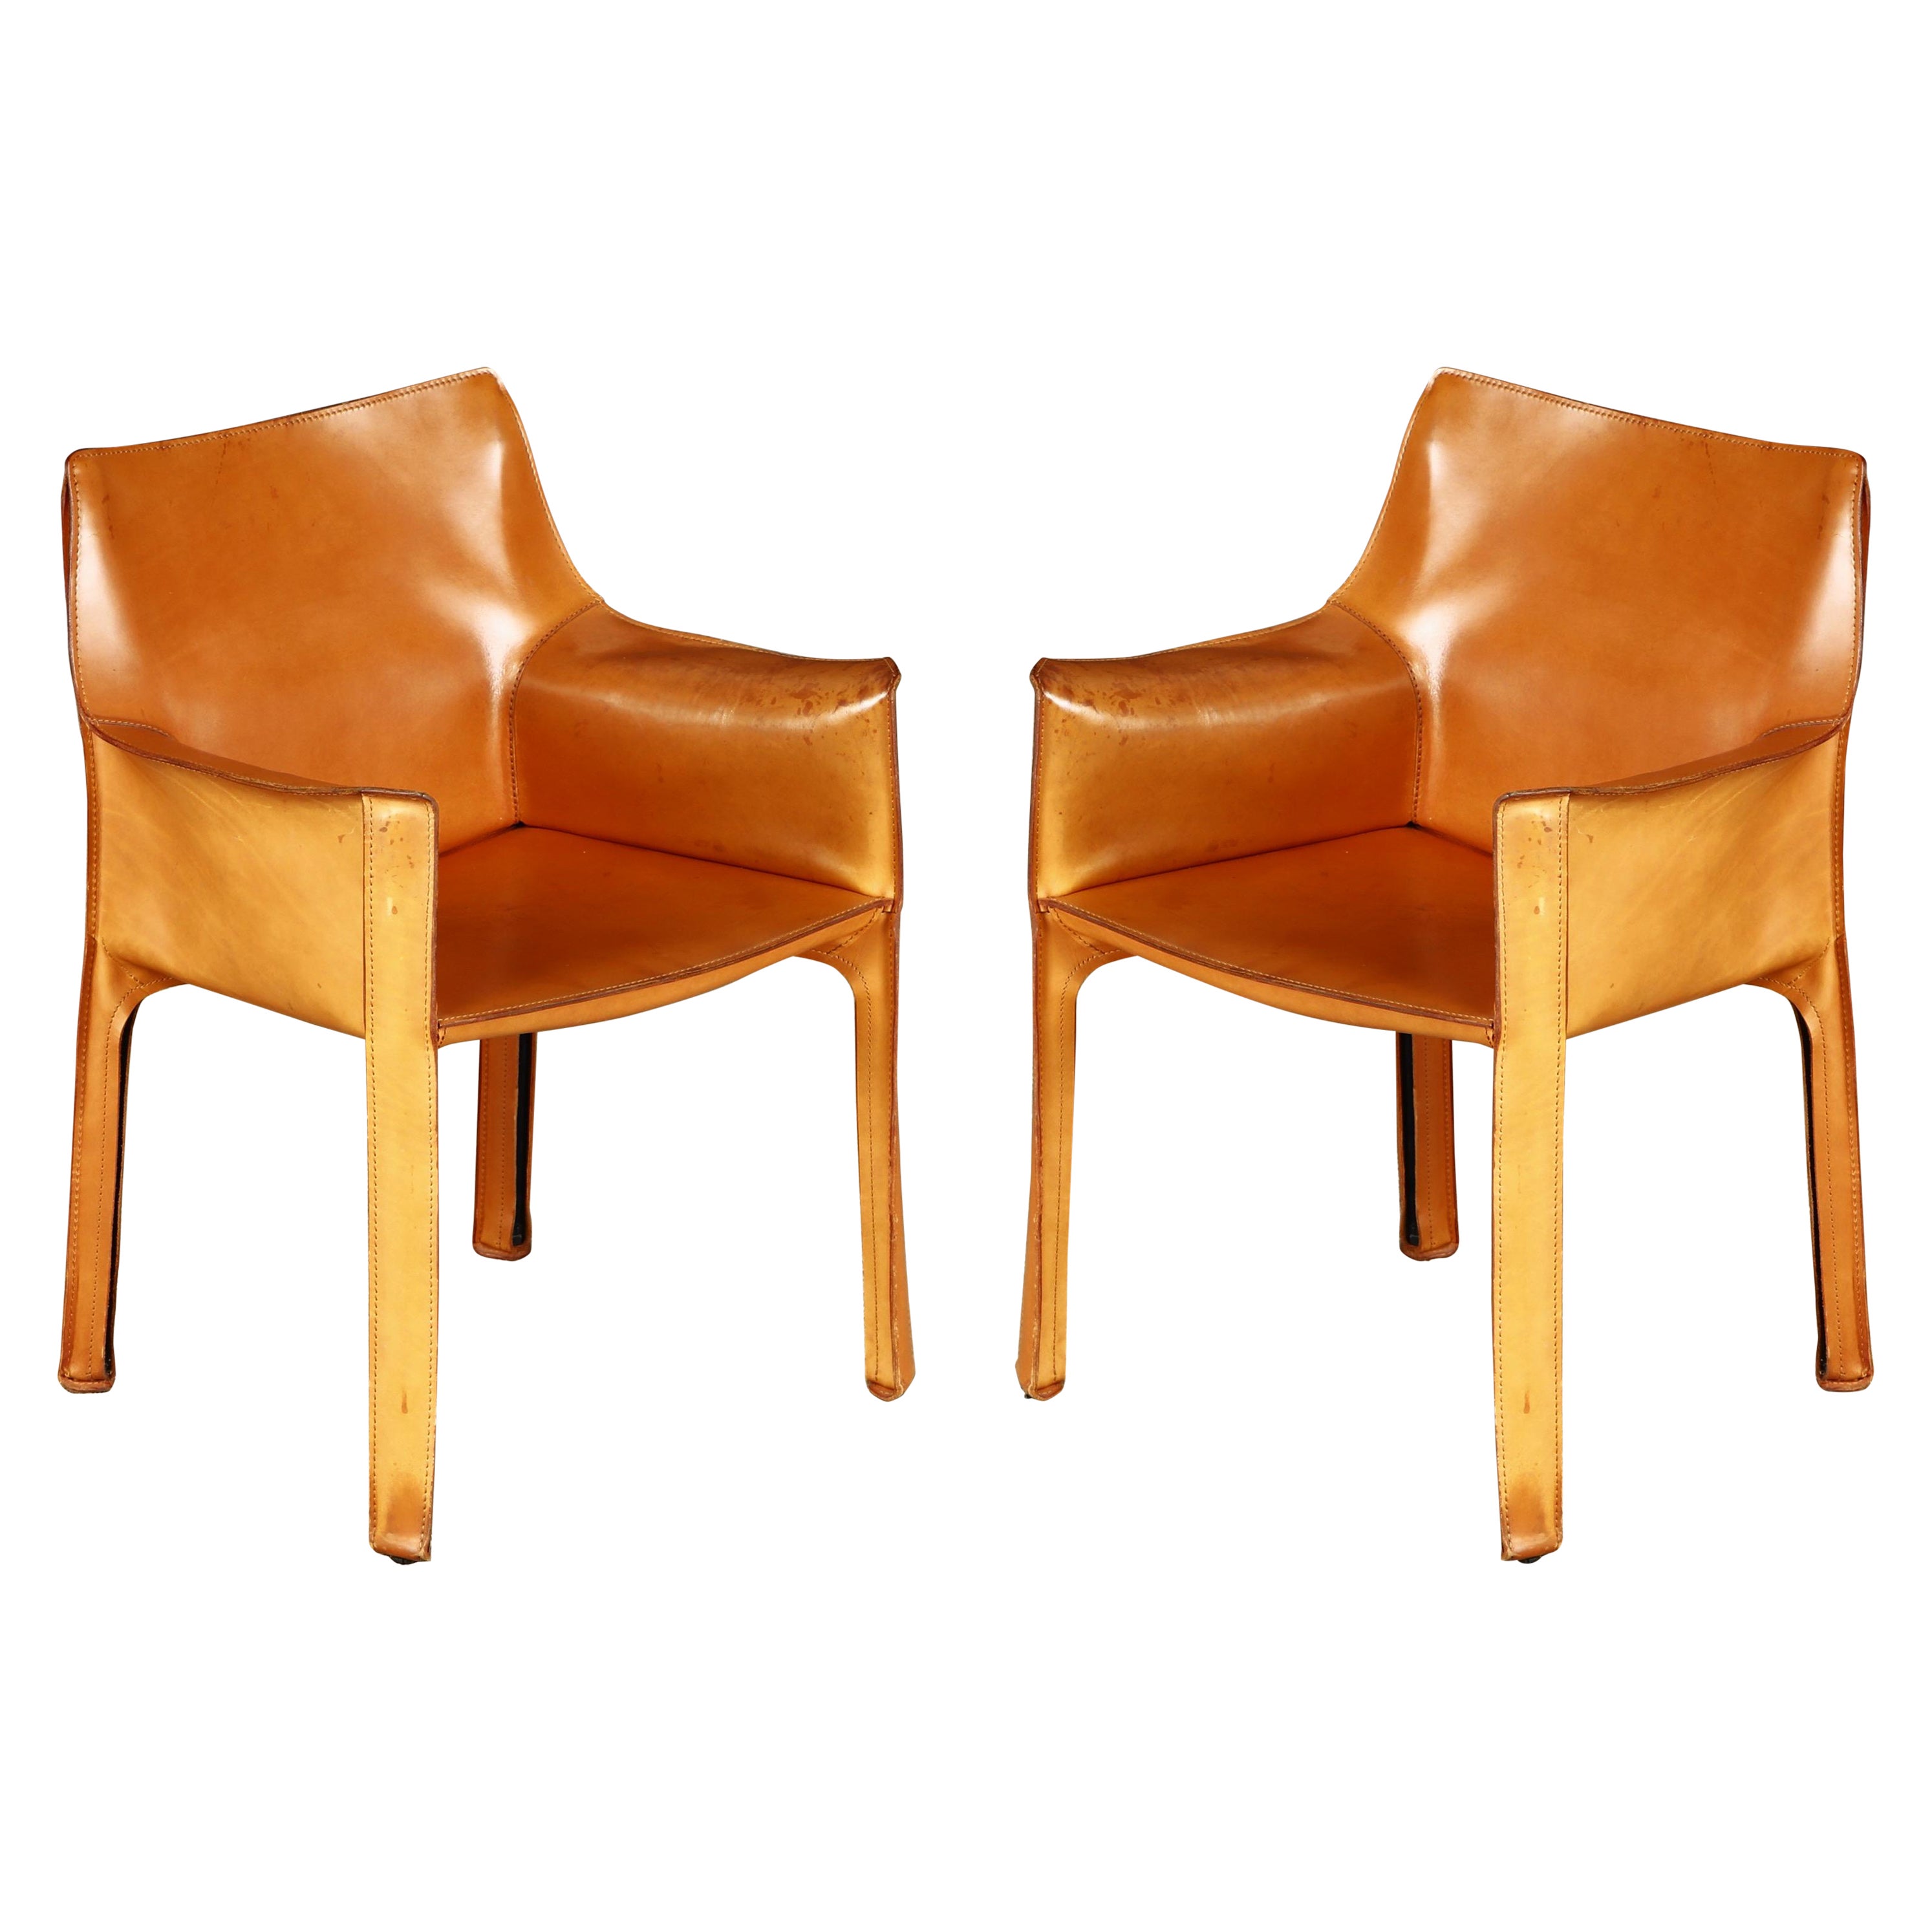 Pair of Cognac Brown Leather Cab Armchairs by Mario Bellini for Cassina, Signed